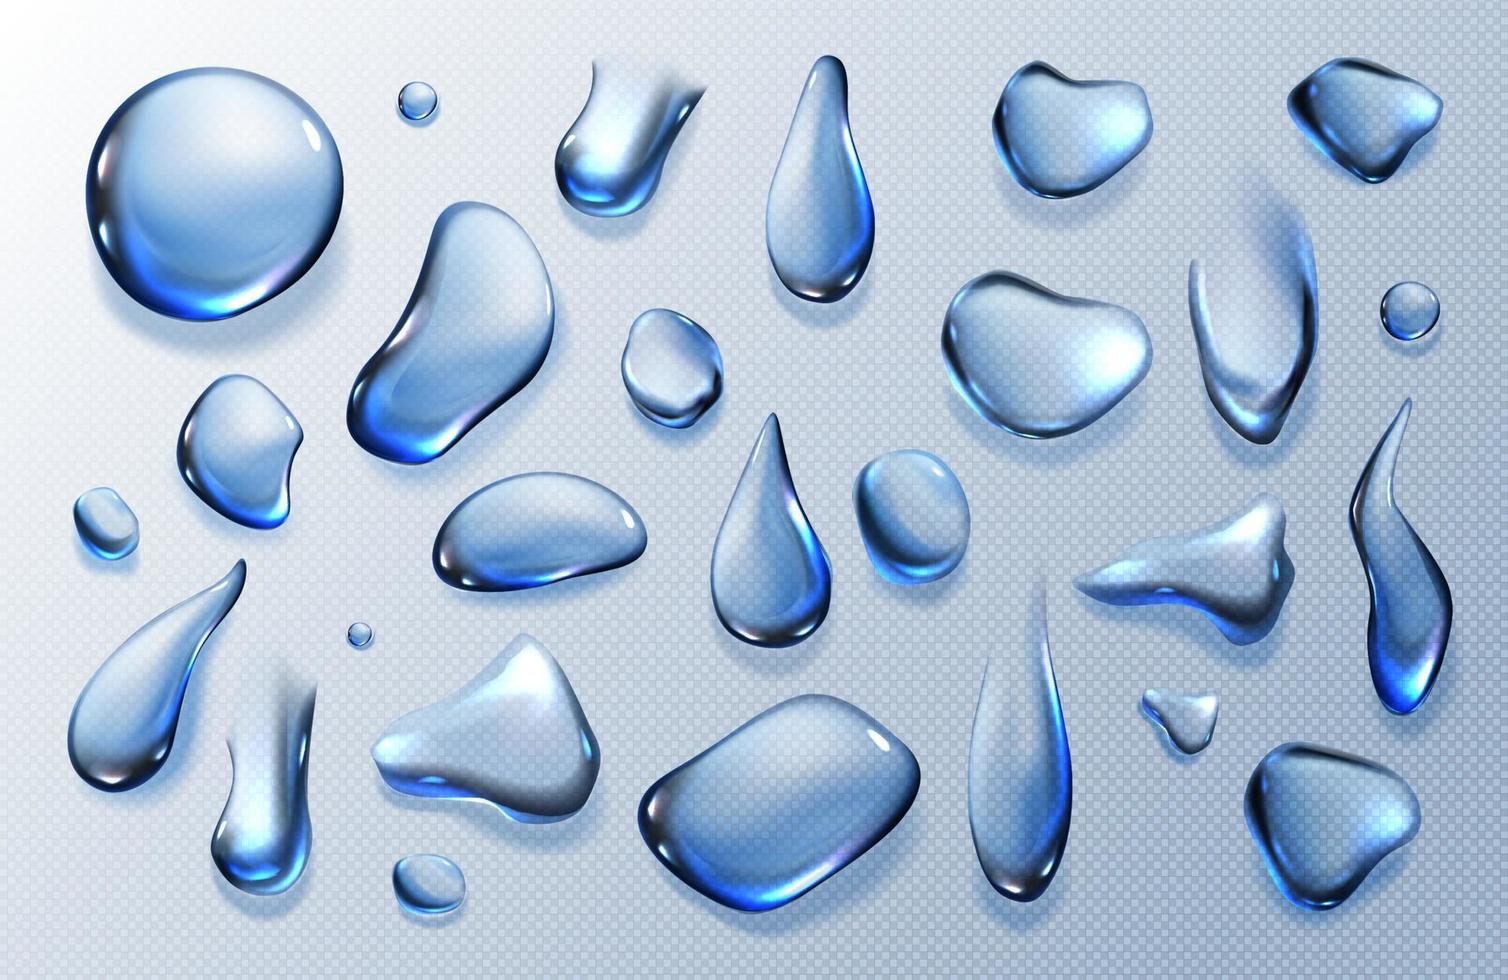 Clear water drops, dew or dripping rain droplets vector